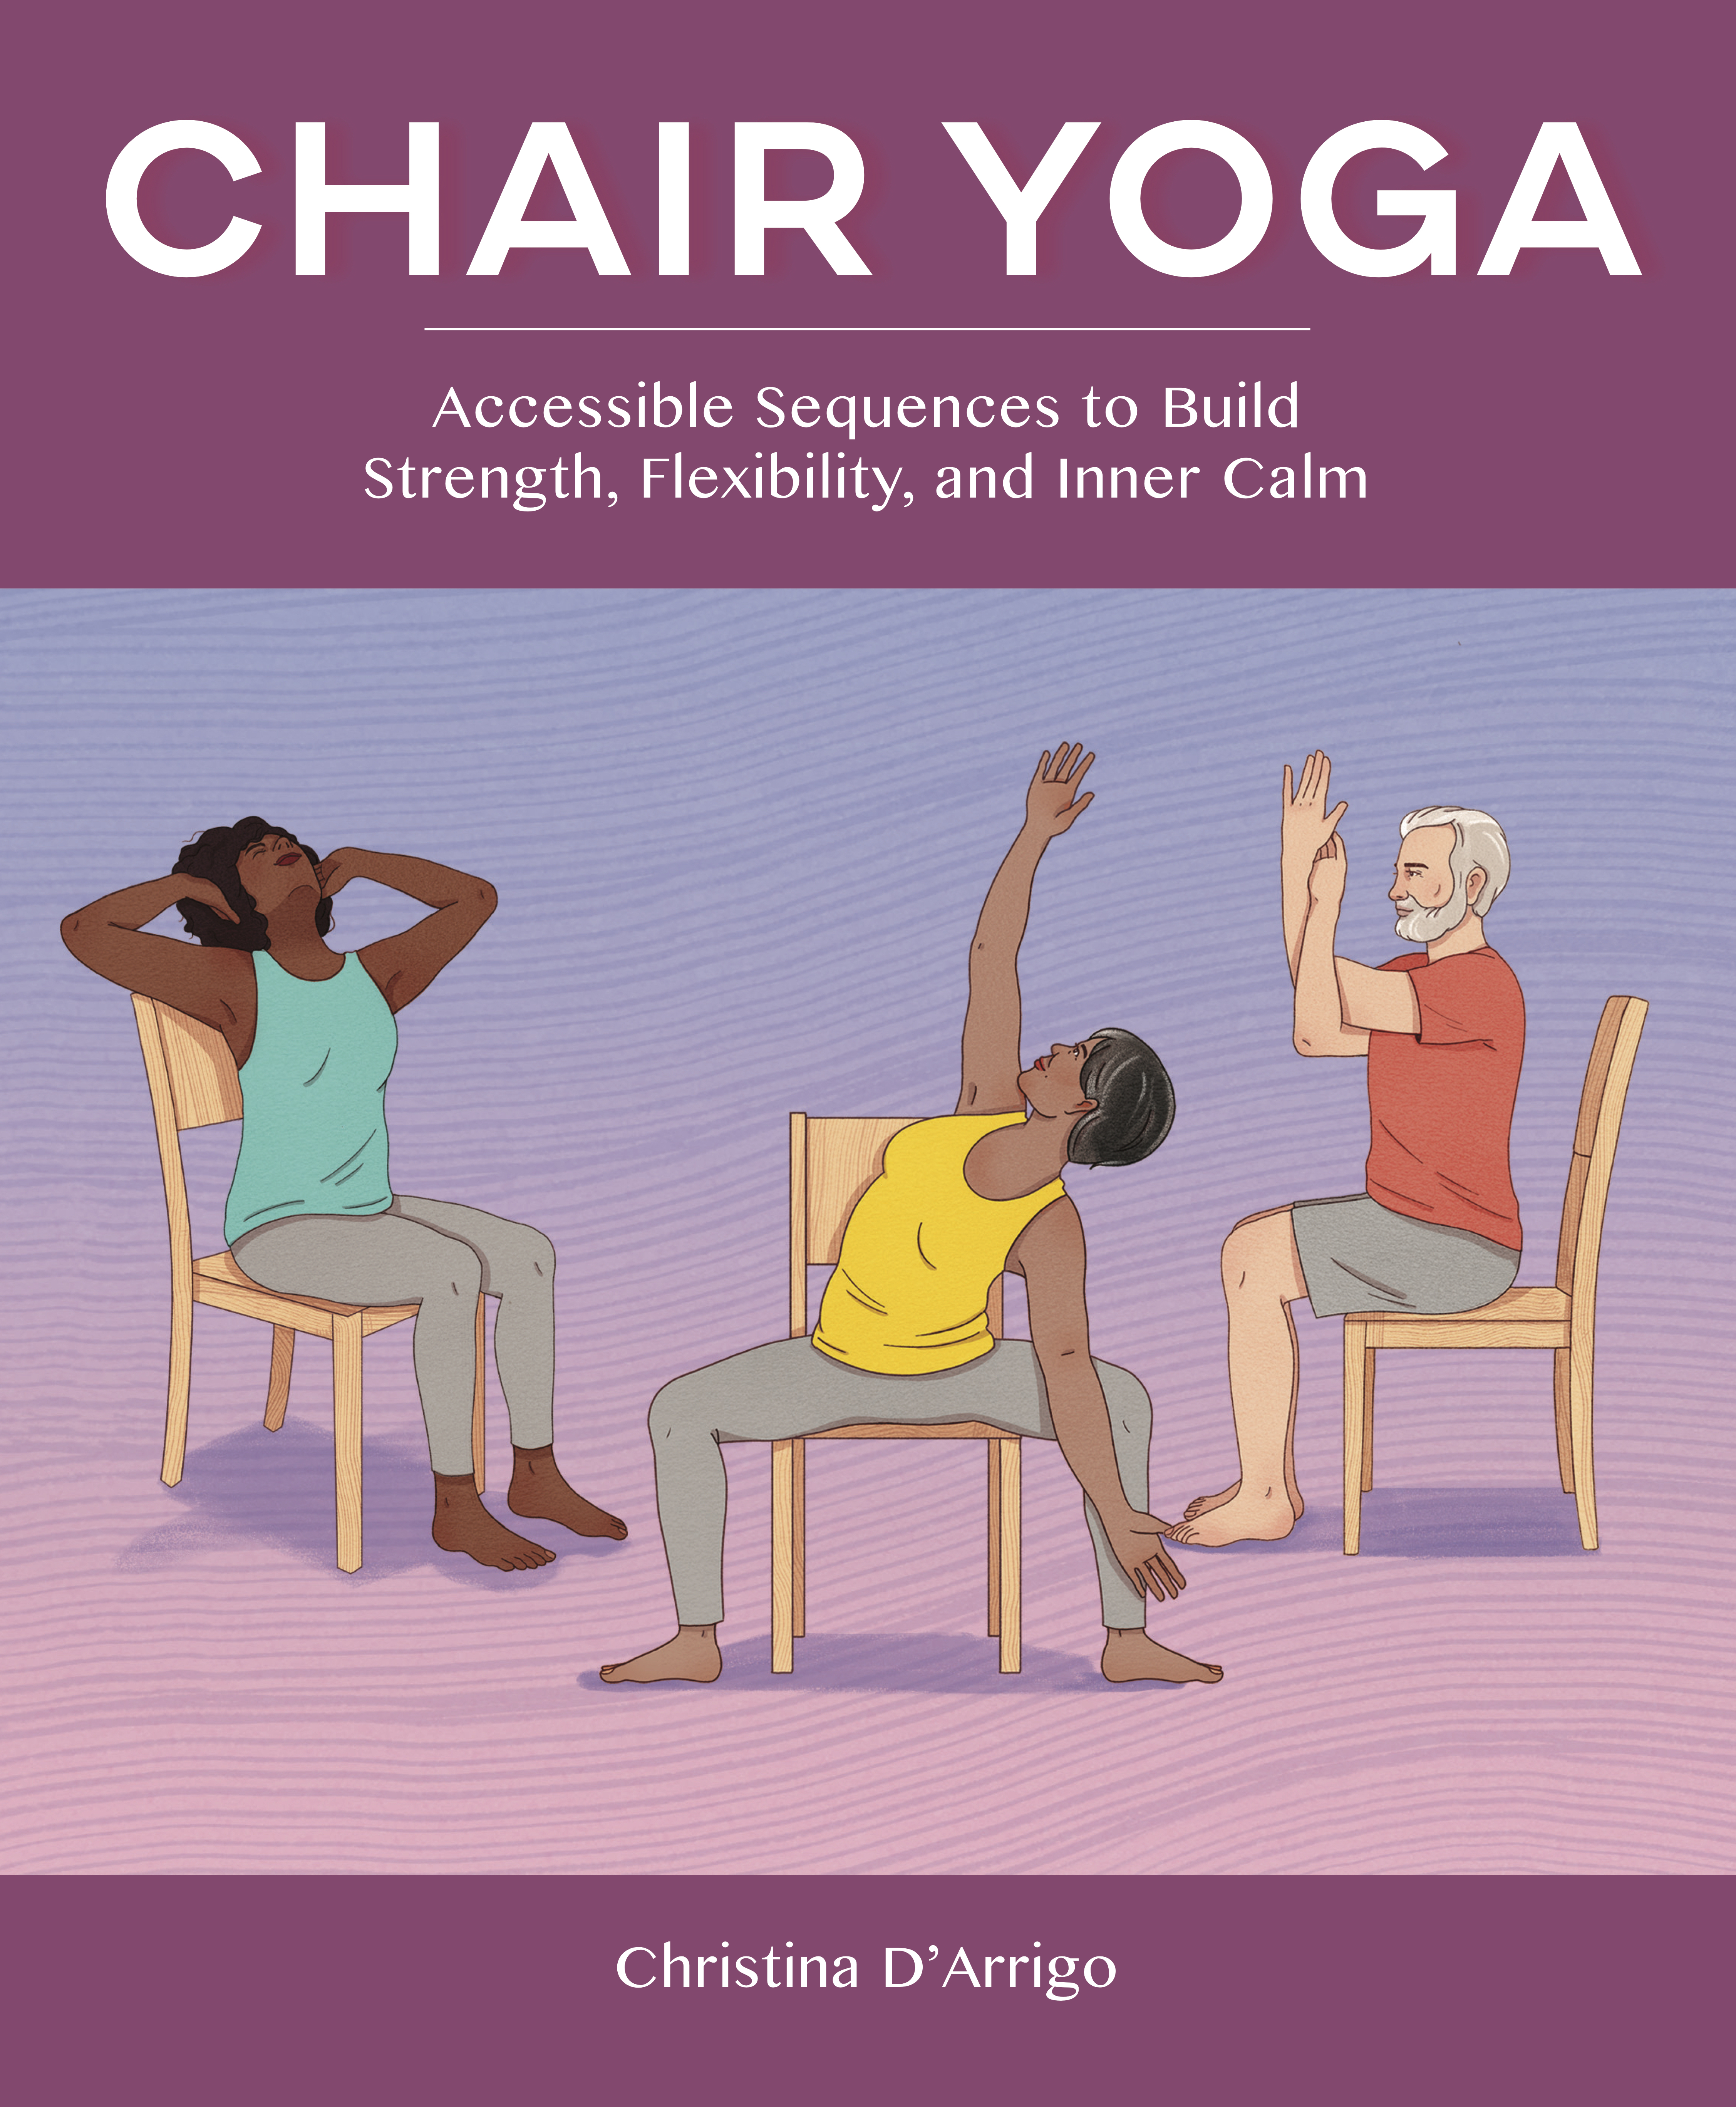 Chair Yoga:Accessible Sequences to Build Strength, Flexibility & Inner Calm